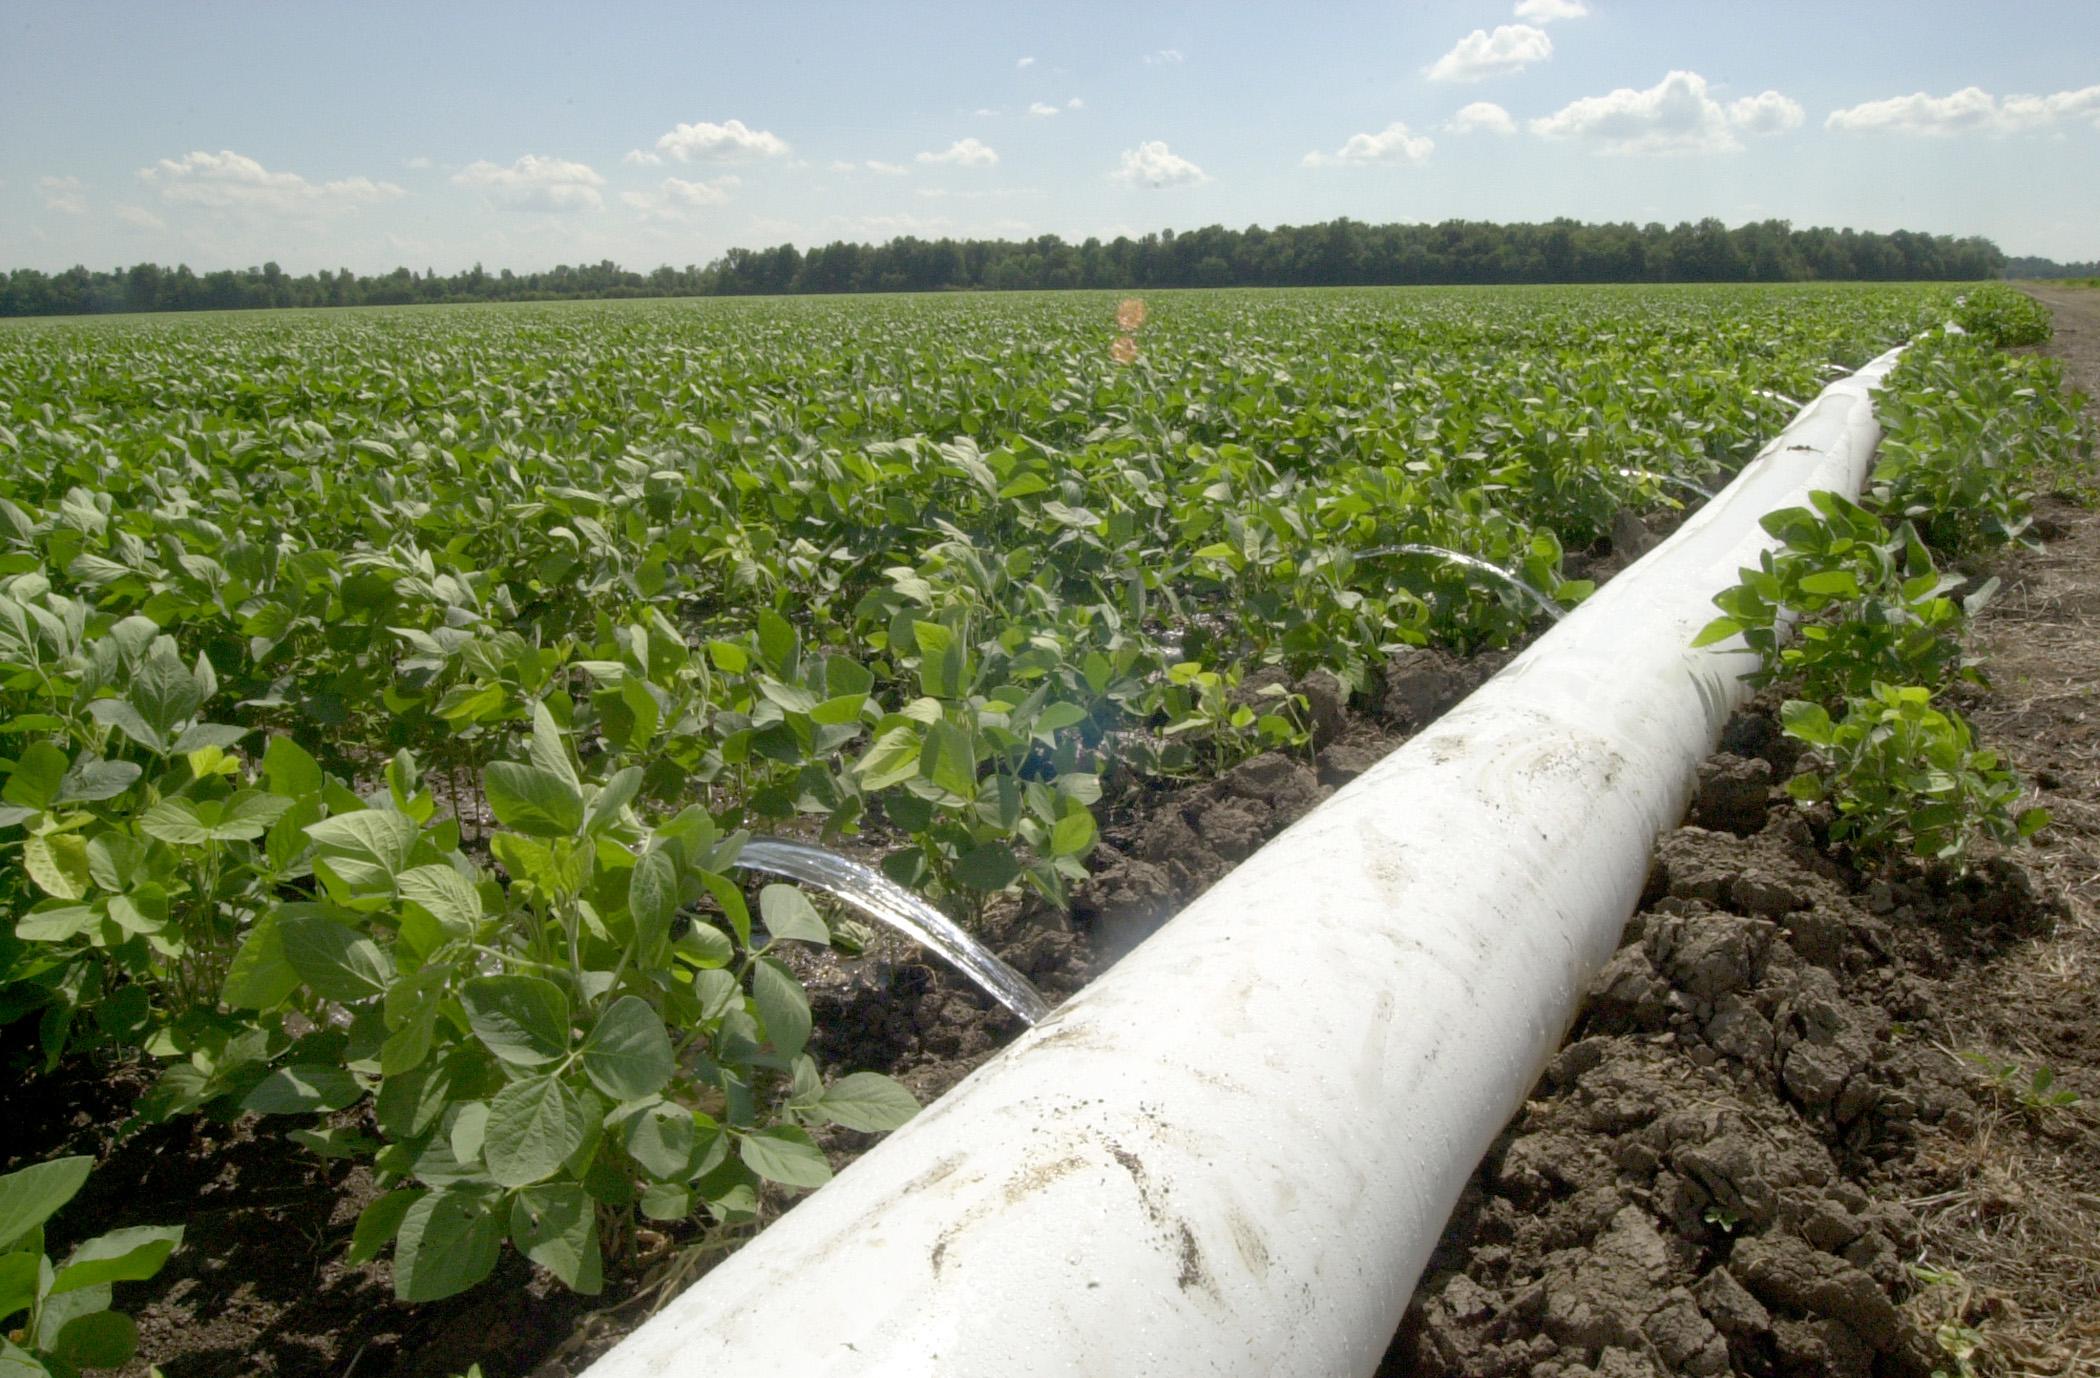 Mississippi State University scientists are evaluating a free software tool that can increase irrigation efficiency for the state's soybean producers. PHAUCET, or Pipe Hole and Universal Crown Evaluation Tool, has the potential to reduce water pumped from the Delta's underground water supply. (MSU Ag Communications/File Photo)